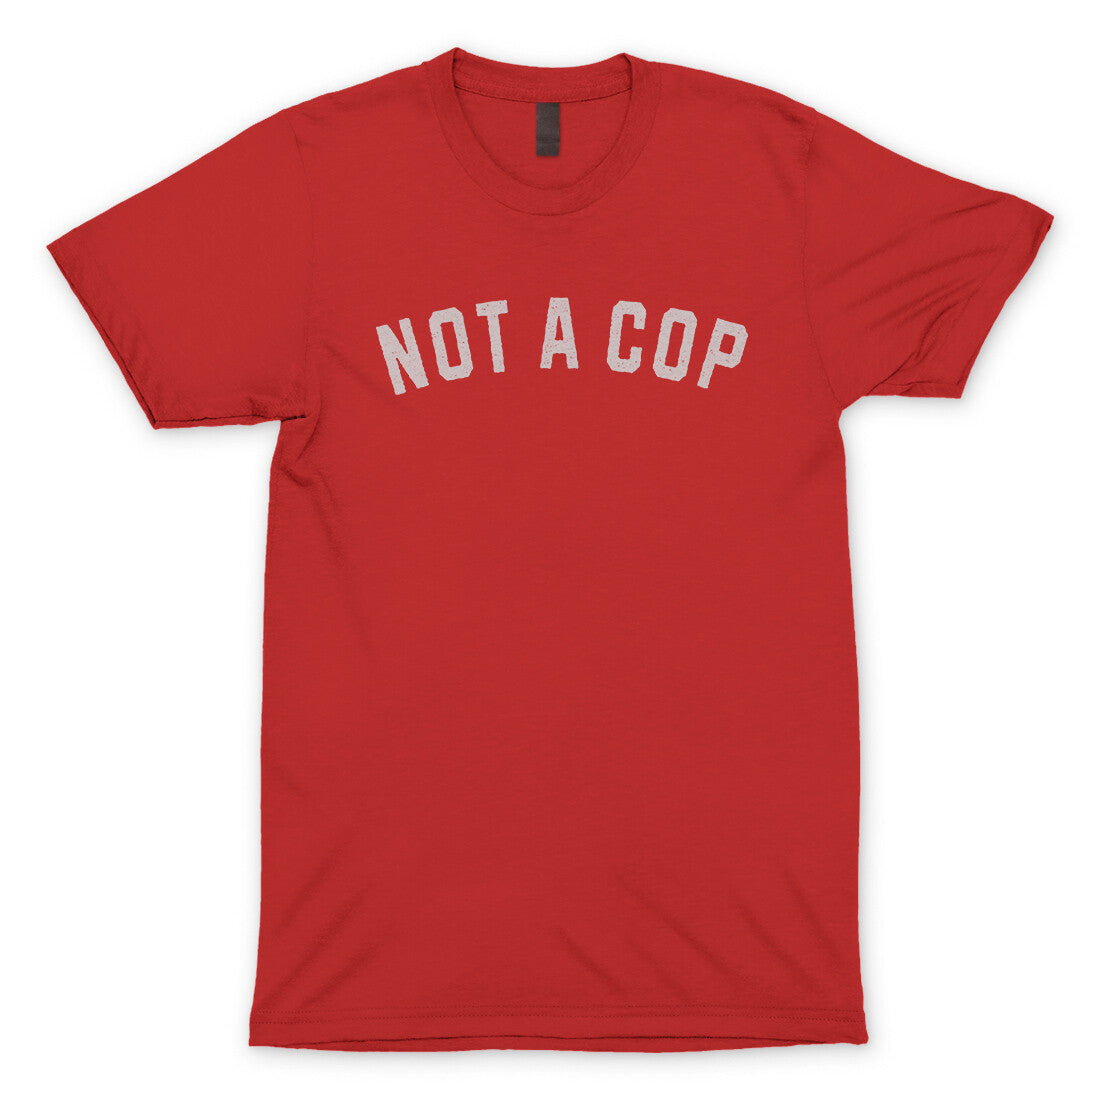 Not a Cop in Red Color